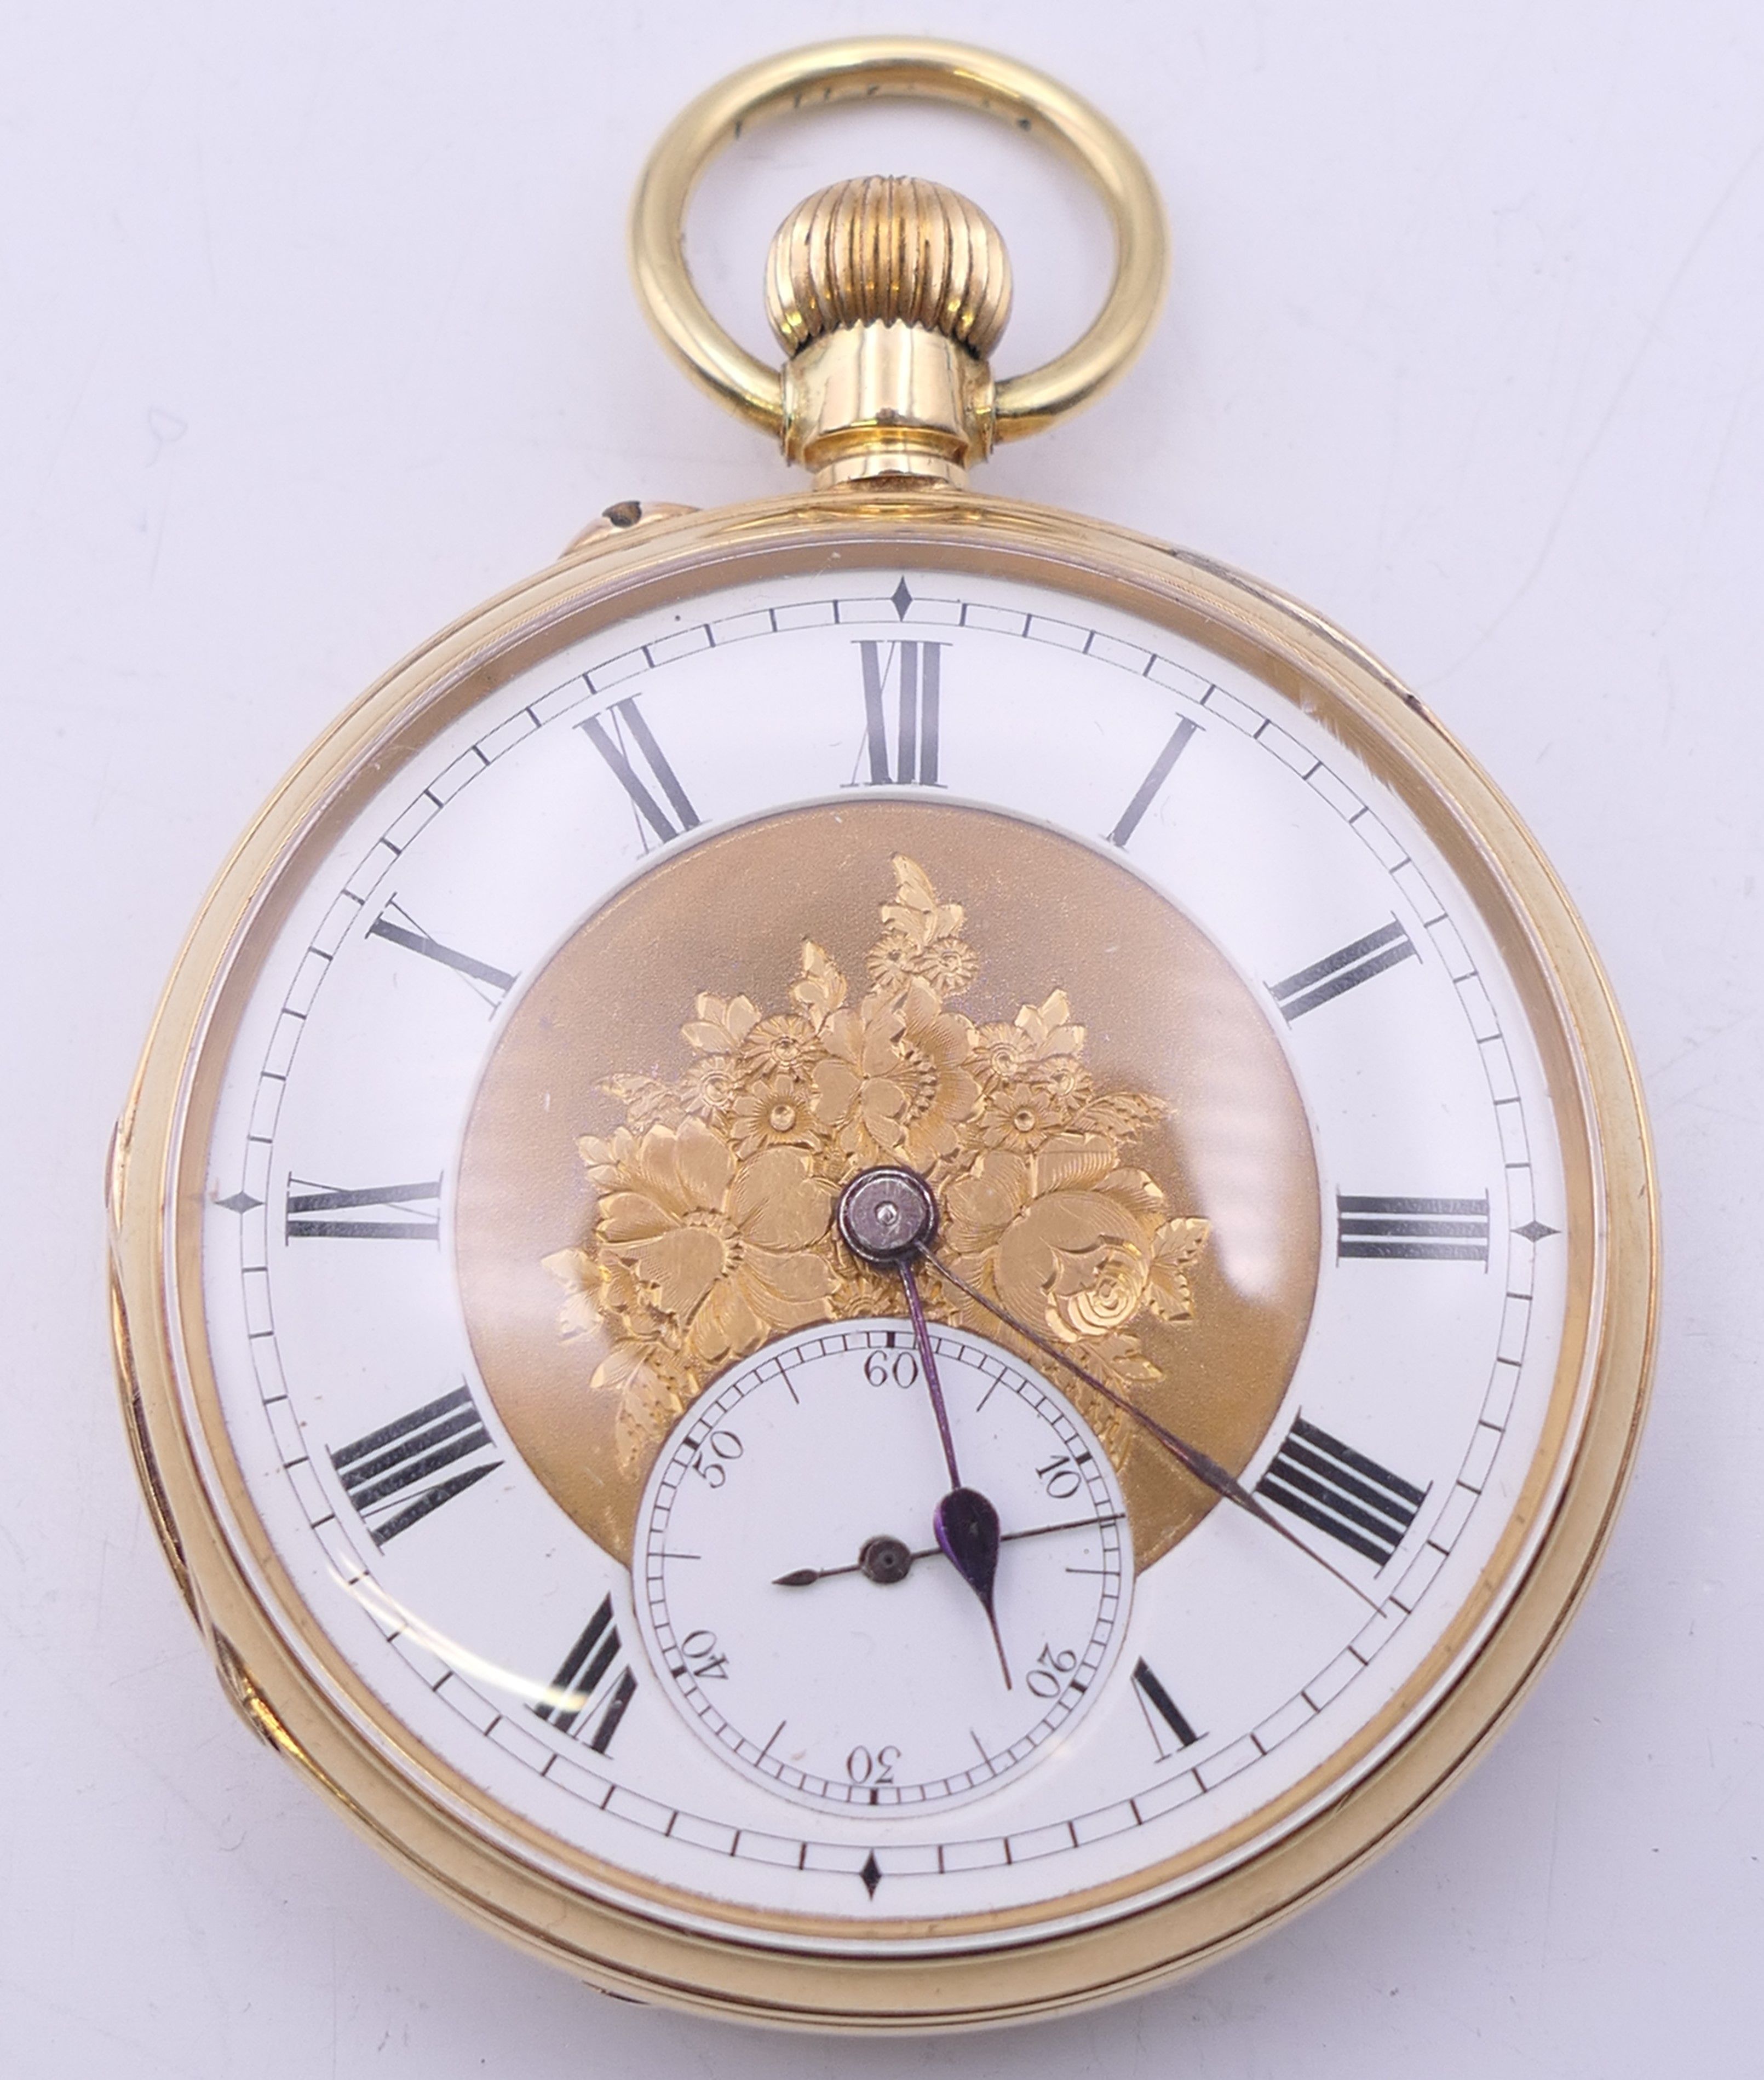 An 18 ct gold pocket watch with florally engraved dial, serial number 15514. 4.25 diameter. - Image 2 of 8